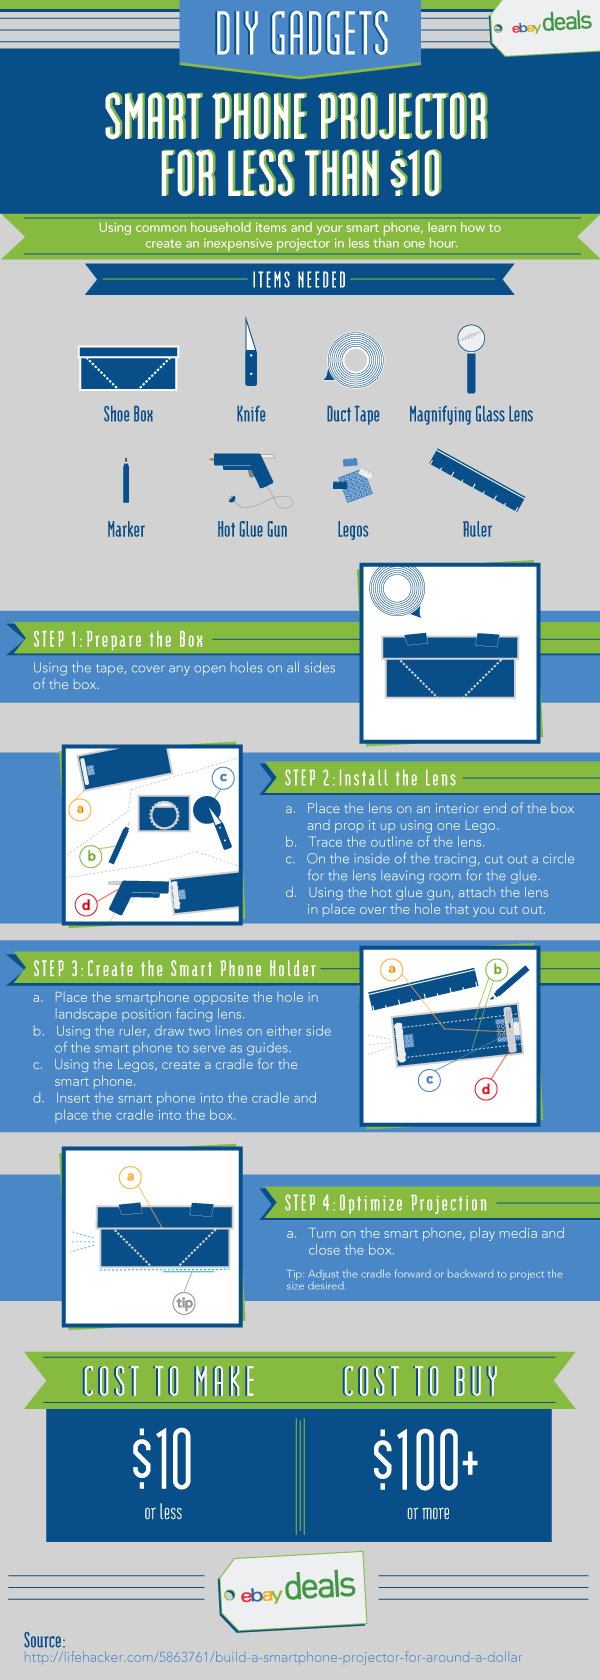 DIY Smartphone Projector for Less Than $10 [Infographic]